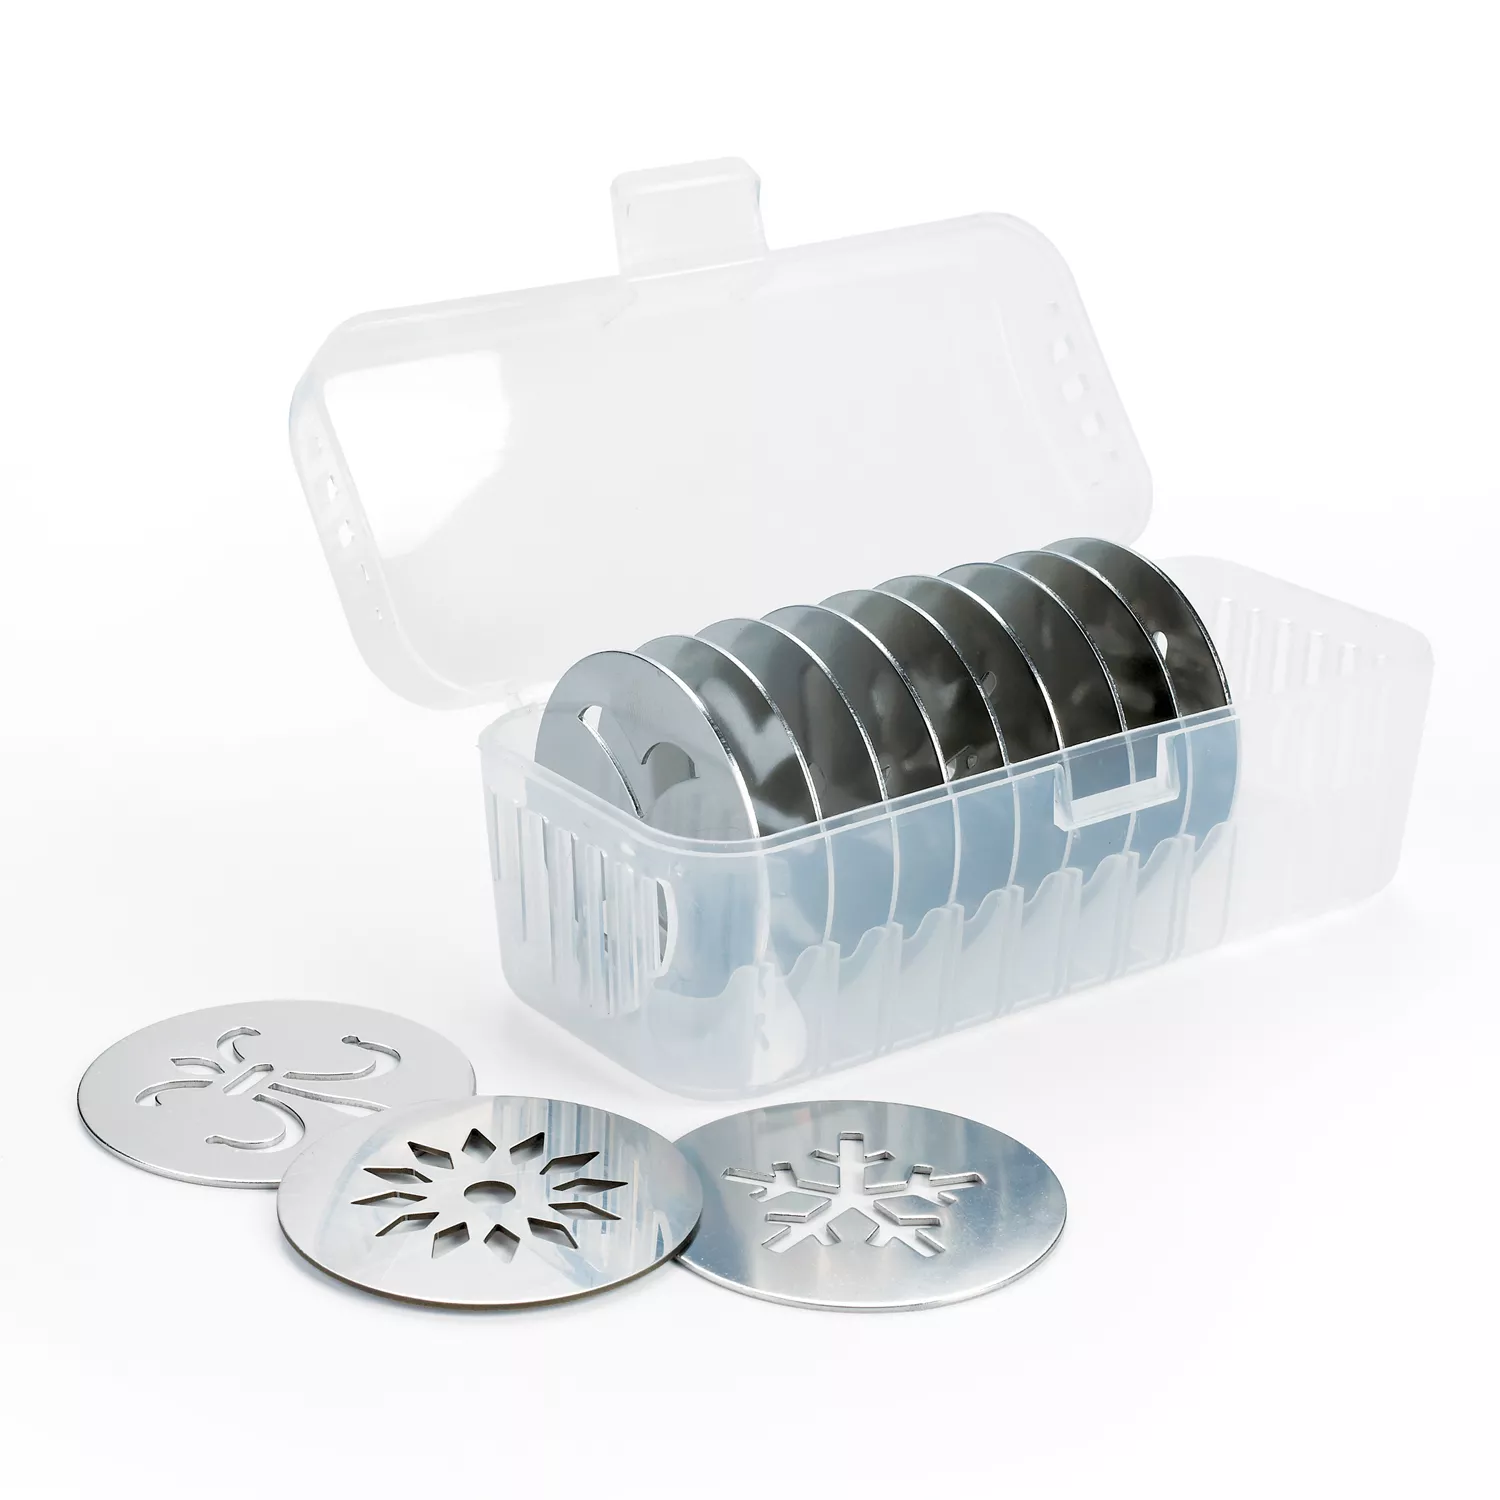 Brand New .. OXO Cookie Press with Disk Storage Case - household items - by  owner - housewares sale - craigslist